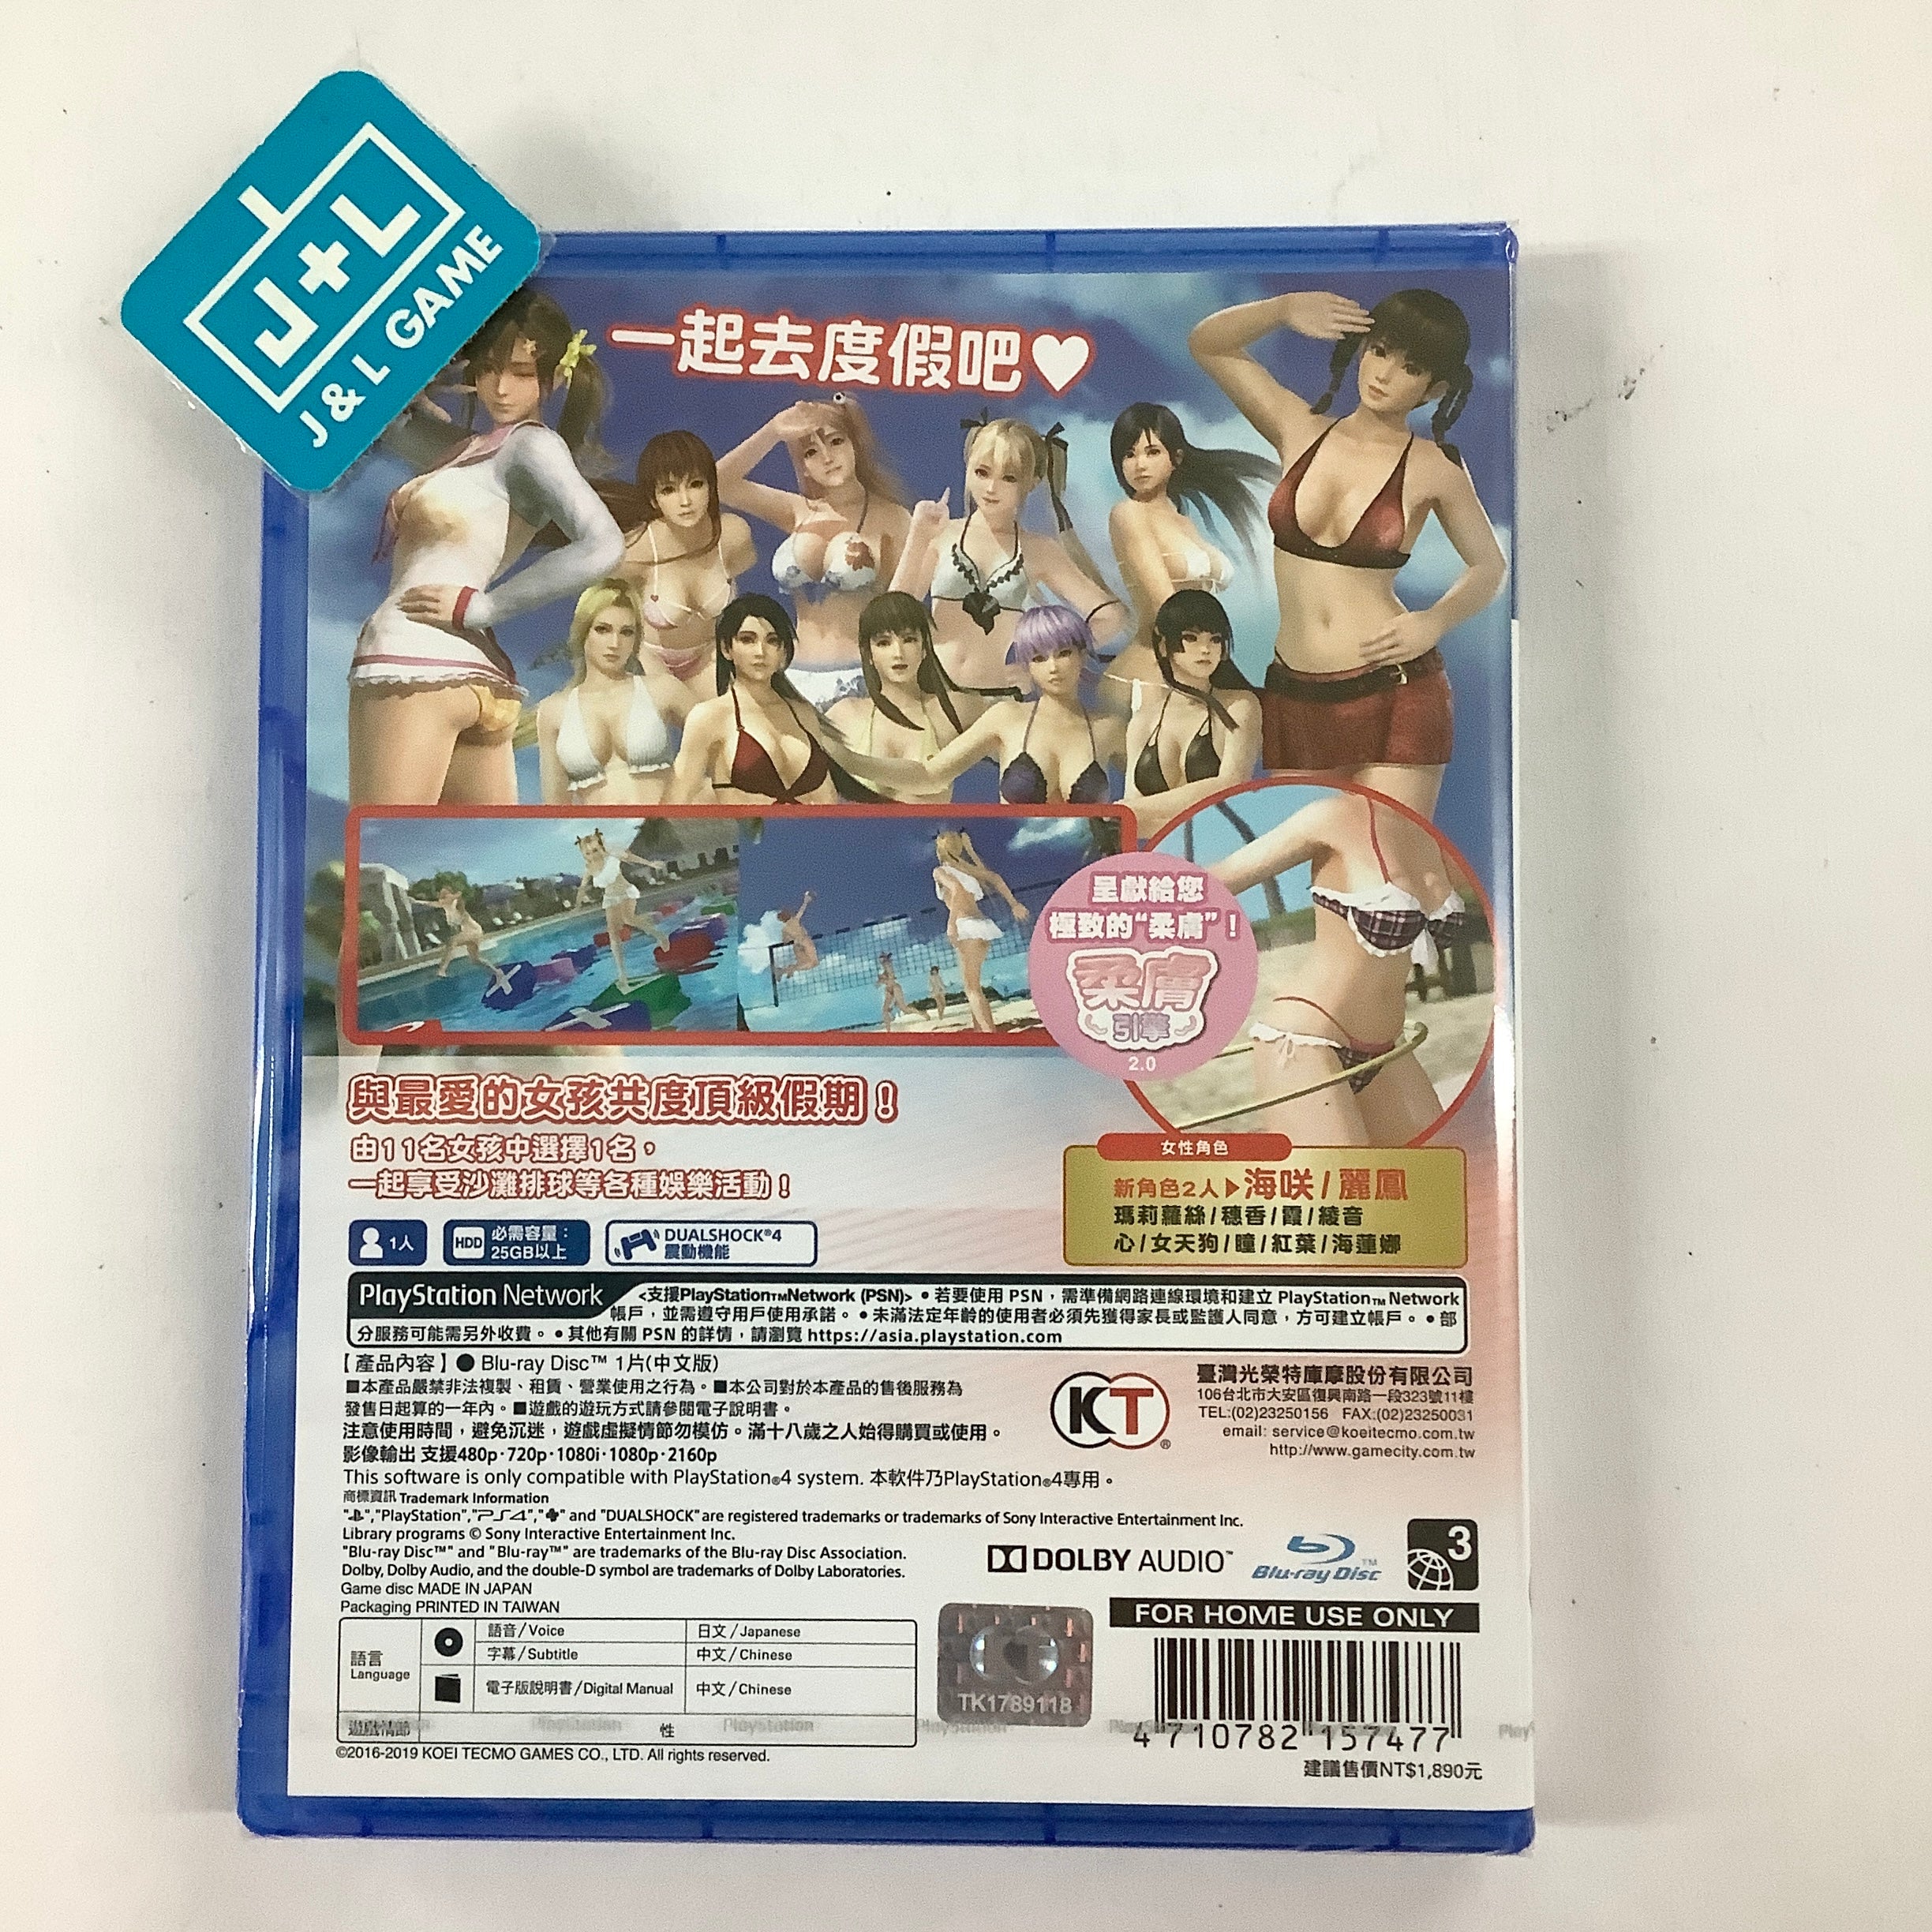 Dead or Alive Xtreme 3 Scarlet (English Sub) - (PS4) PlayStation 4 (Asia Import)